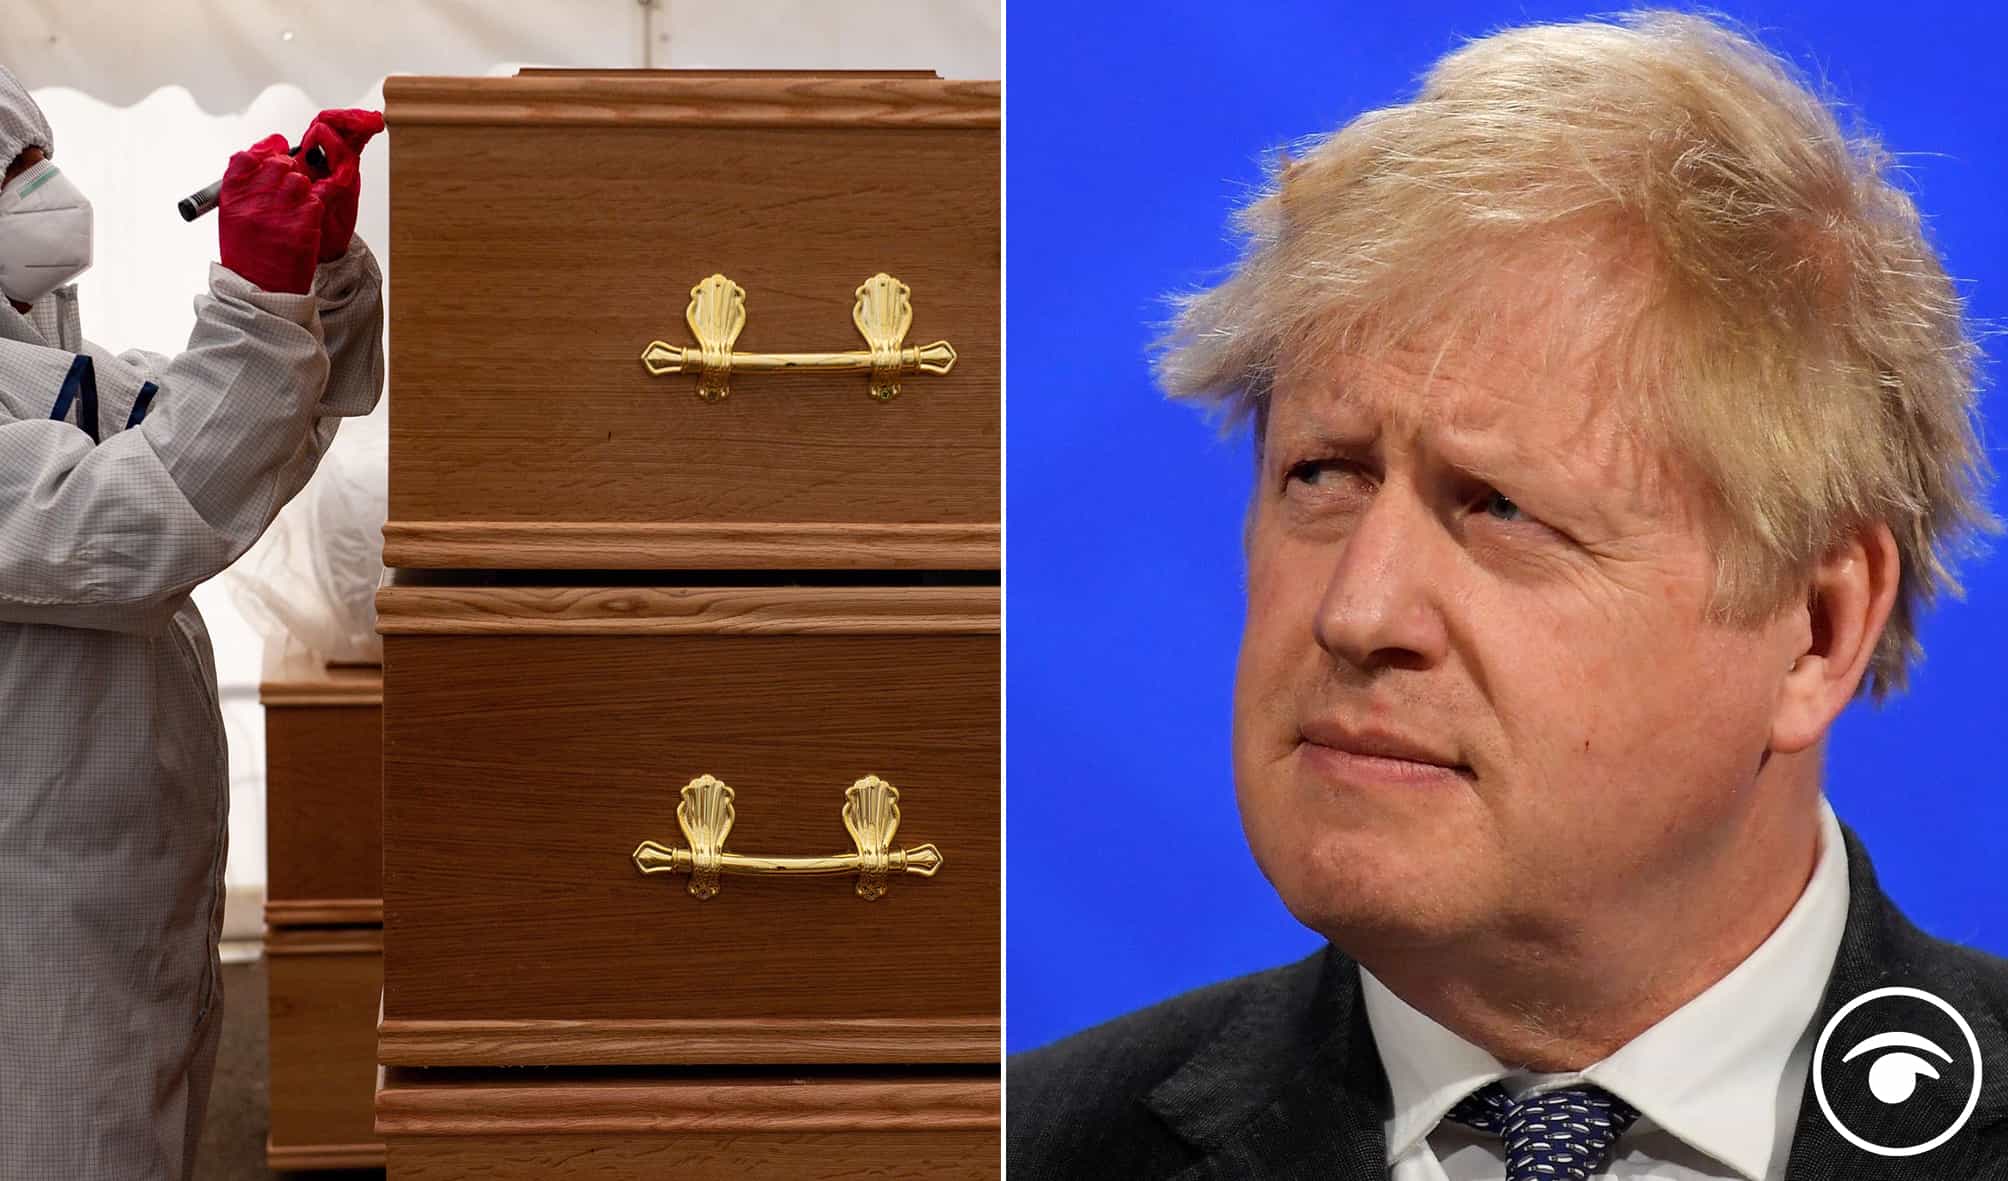 Top reactions as ‘Boris The Liar’ trends following reports he said ‘let the bodies pile high’